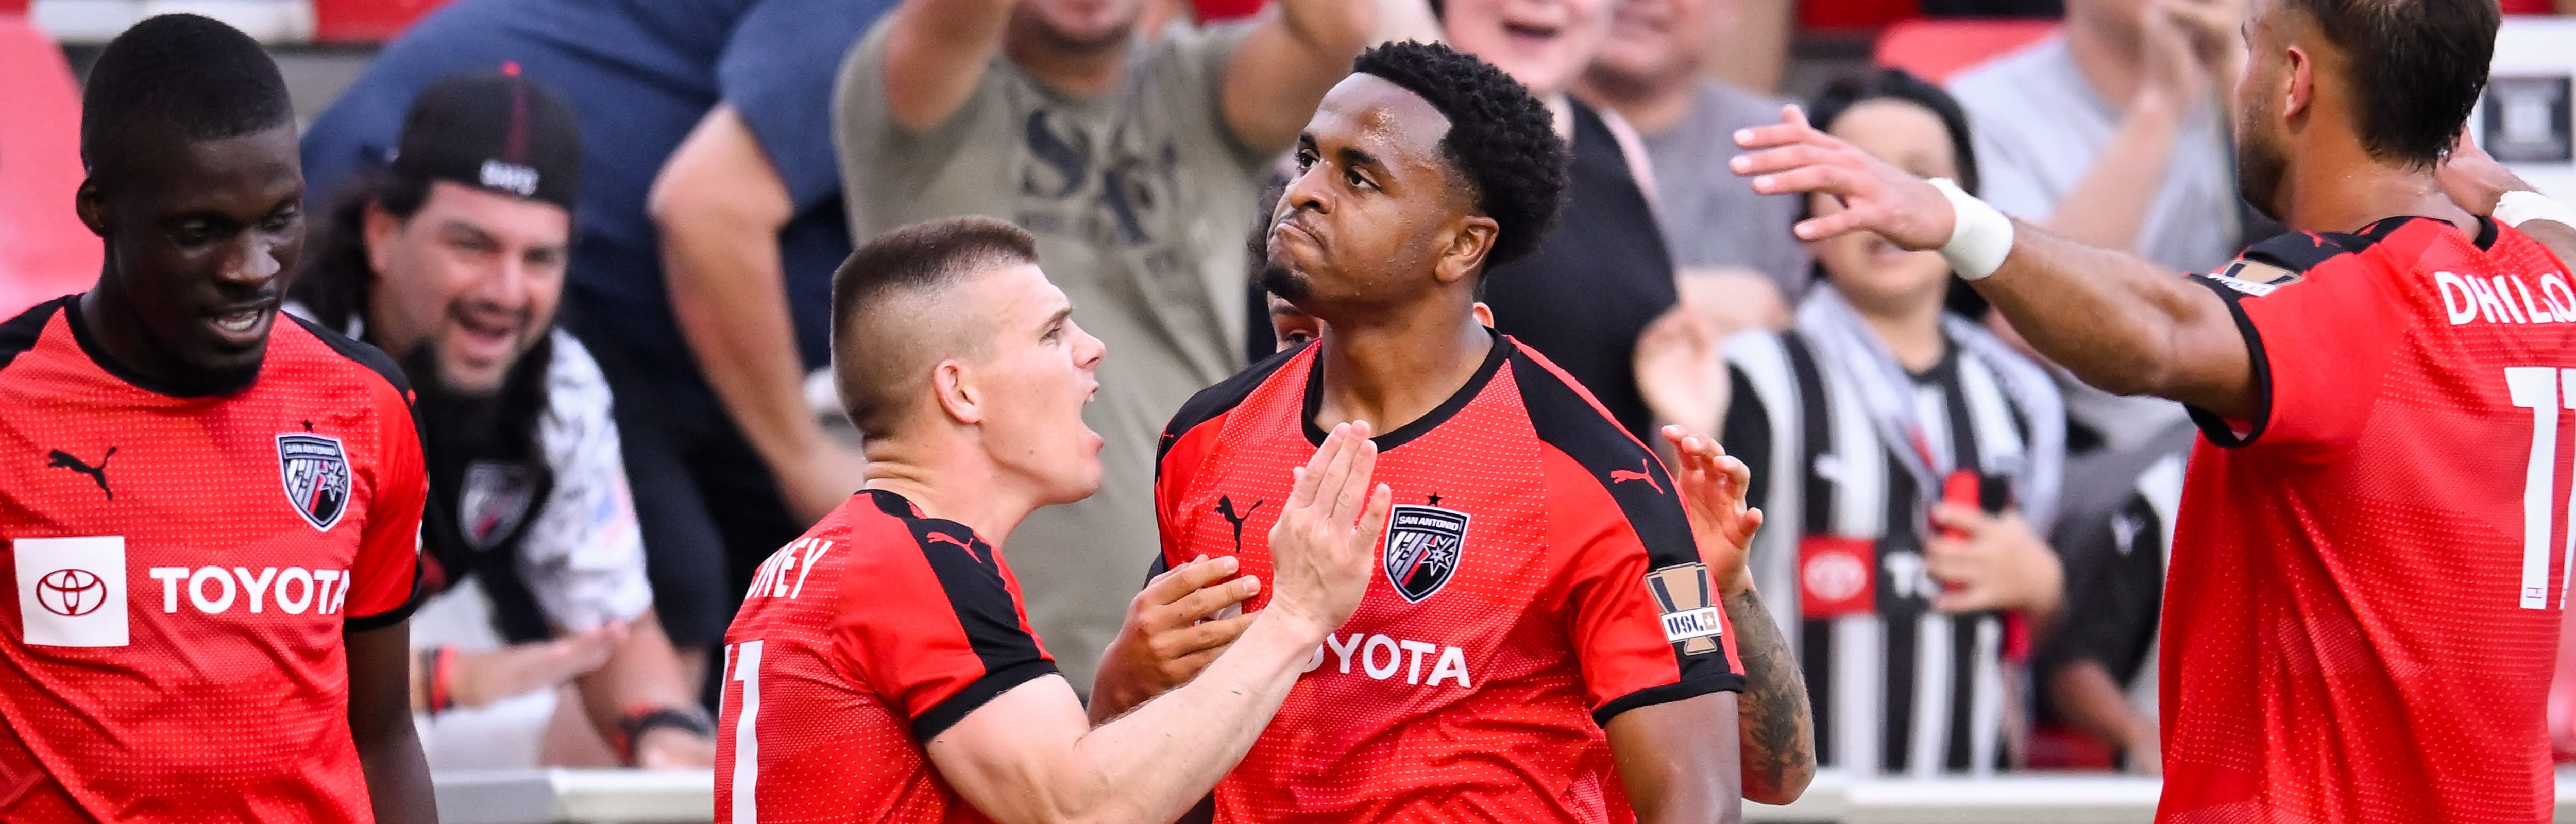 SAN ANTONIO FC DEFEATS NEW MEXICO UNITED 2-1 IN FRONT OF SELLOUT CROWD AT TOYOTA FIELD featured image